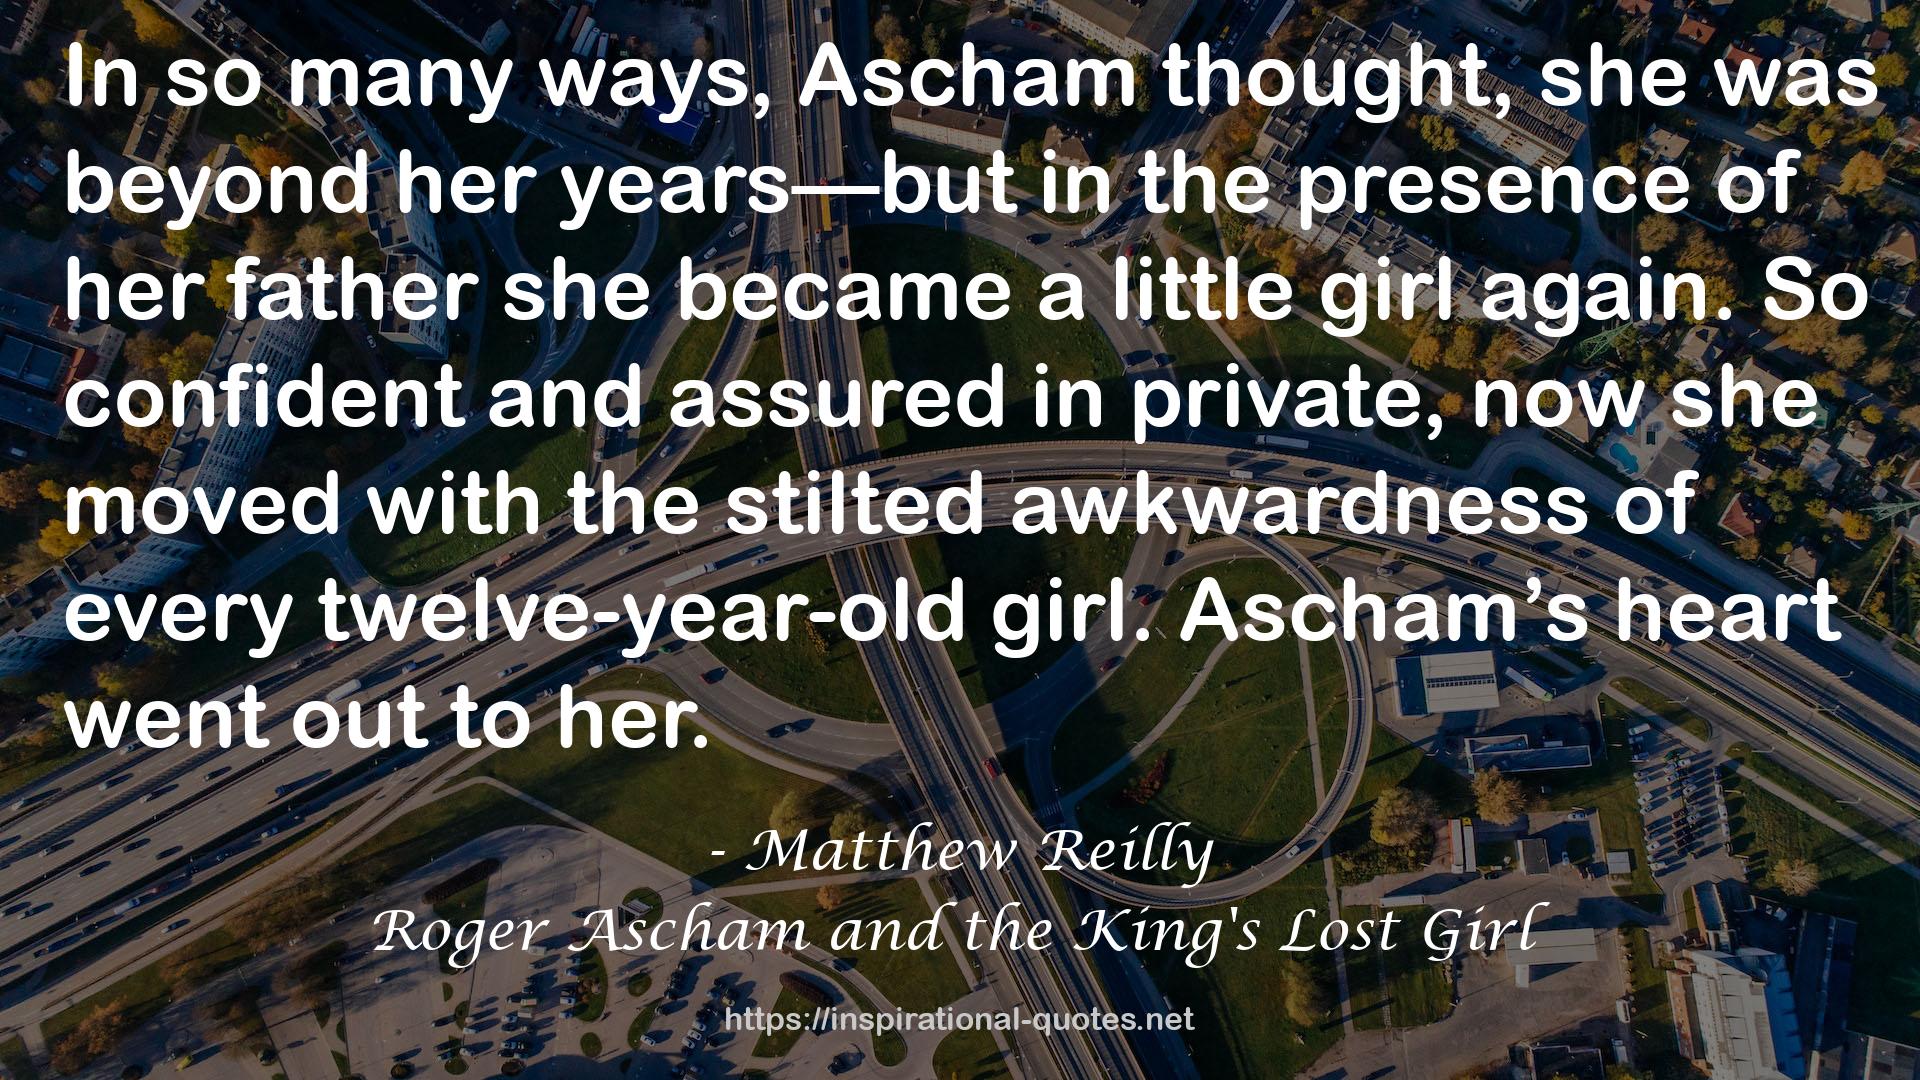 Roger Ascham and the King's Lost Girl QUOTES